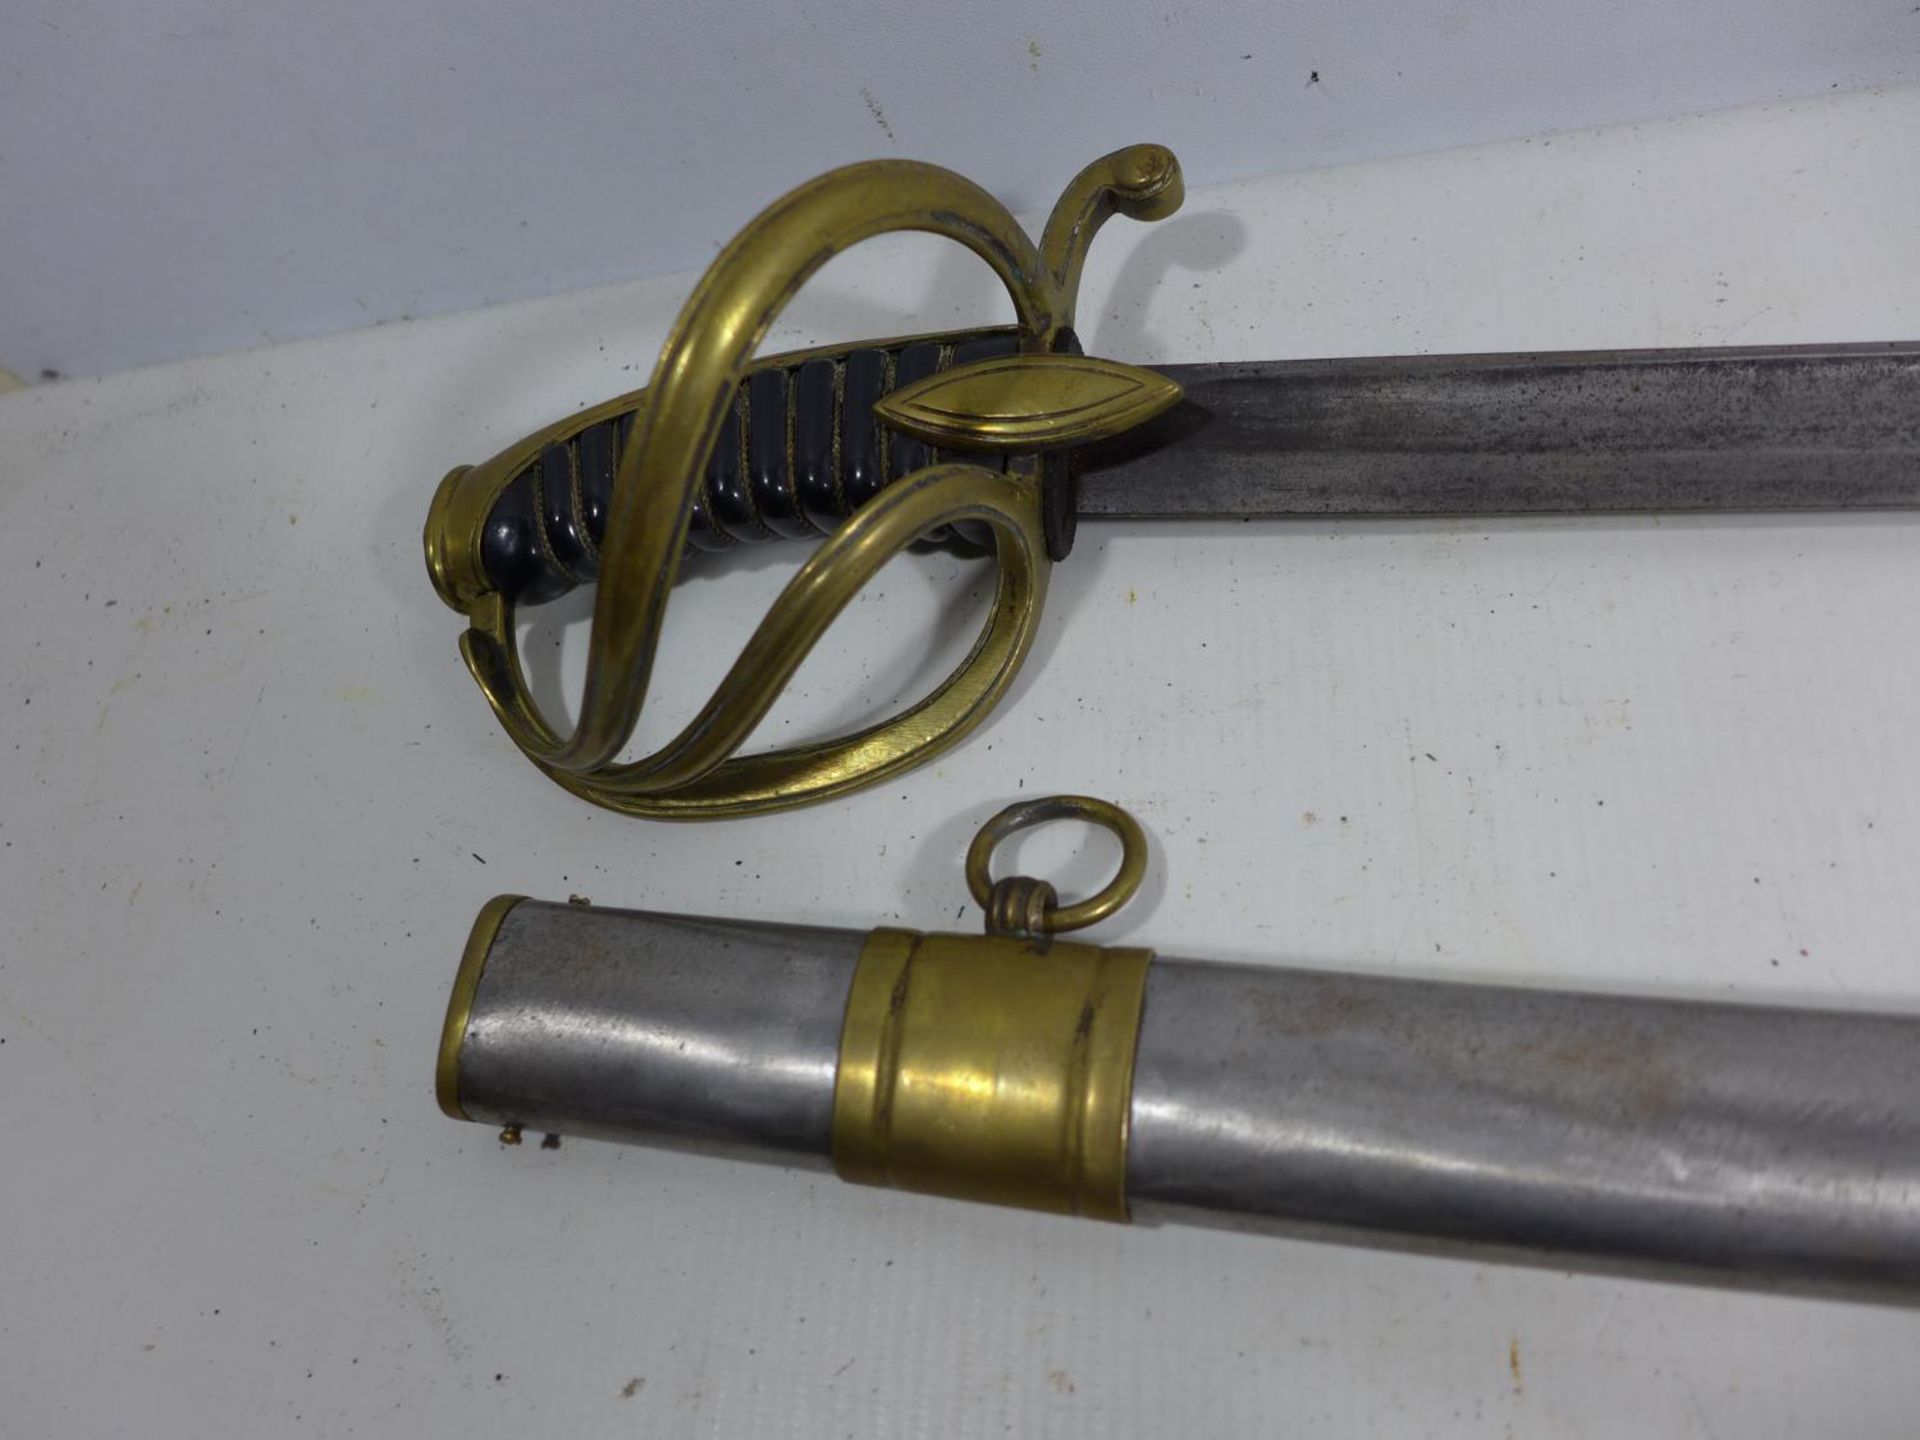 A REPLICA NAPOLEONIC WAR IMPERIAL FRENCH LIGHT CAVALRY SWORD AND SCABBARD, 82CM BLADE, LENGTH 99CM - Image 2 of 6